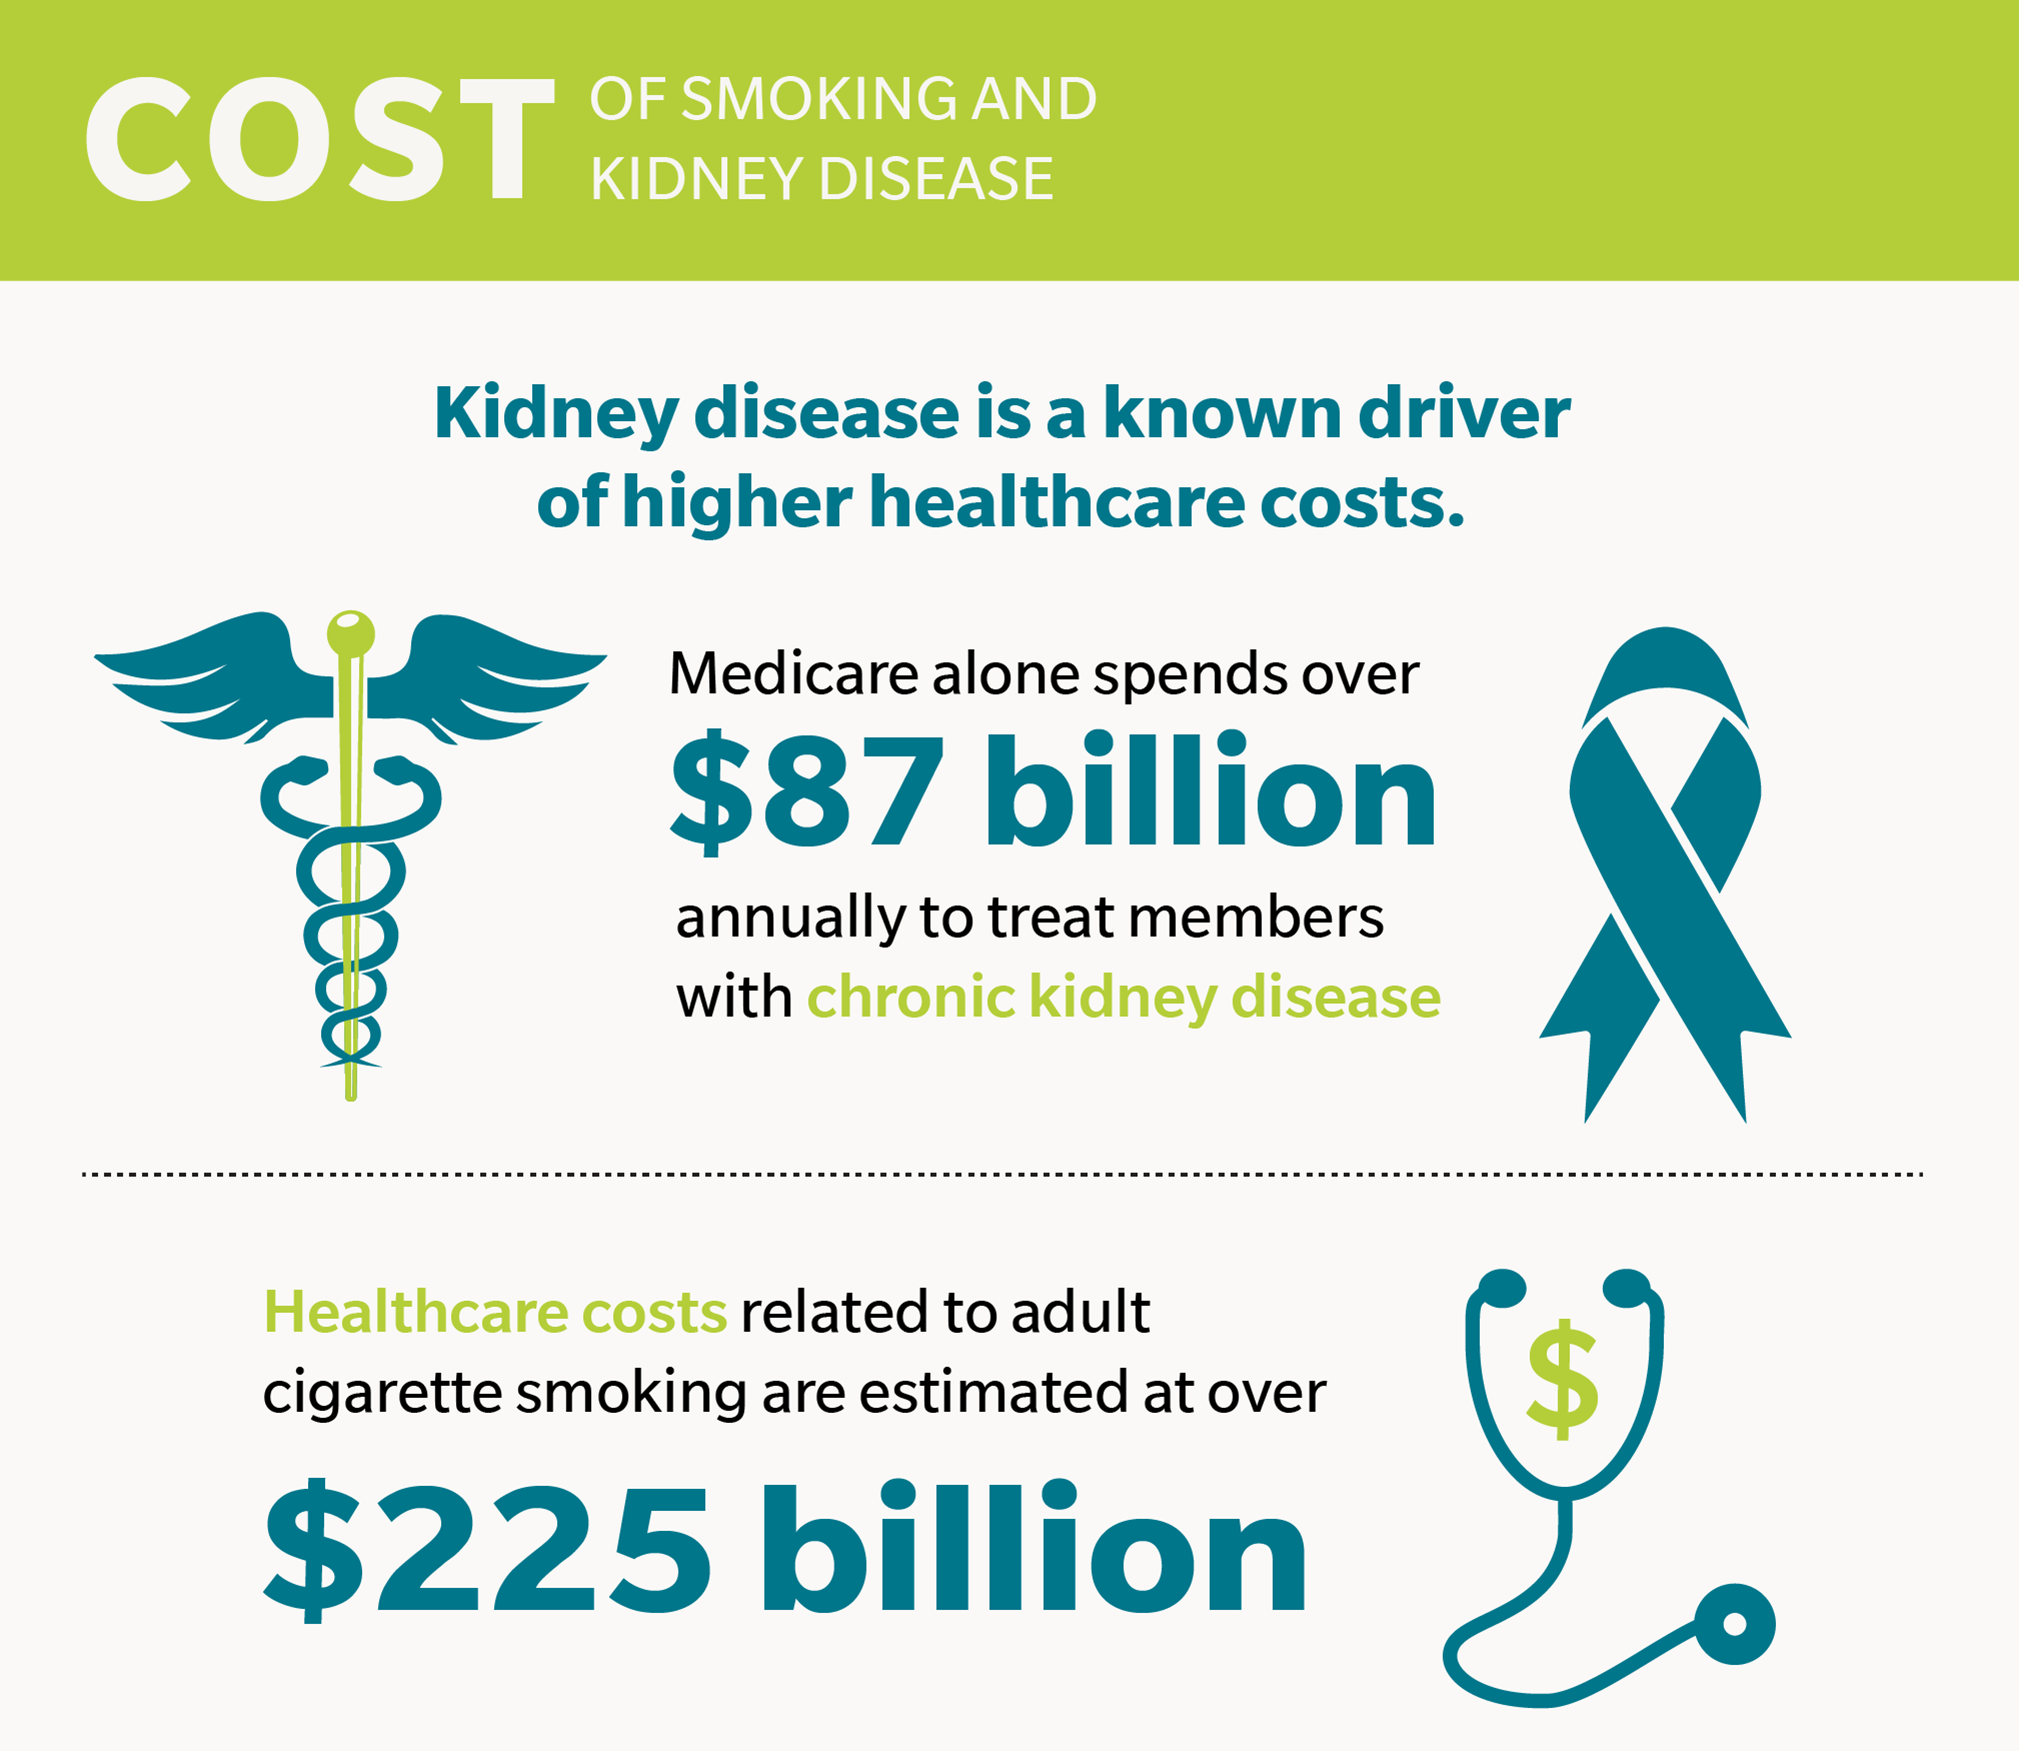 Kidney disease is a known driver of higher healthcare costs. In fact, Medicare alone spends over $87 billion annually to treat members with chronic kidney disease. However, the cost of healthcare expenditures related to adult cigarette smoking is estimated to be even higher—over $225 billion. Of this amount, Medicare or Medicaid fund more than 50% of smoking-attributable healthcare spending.